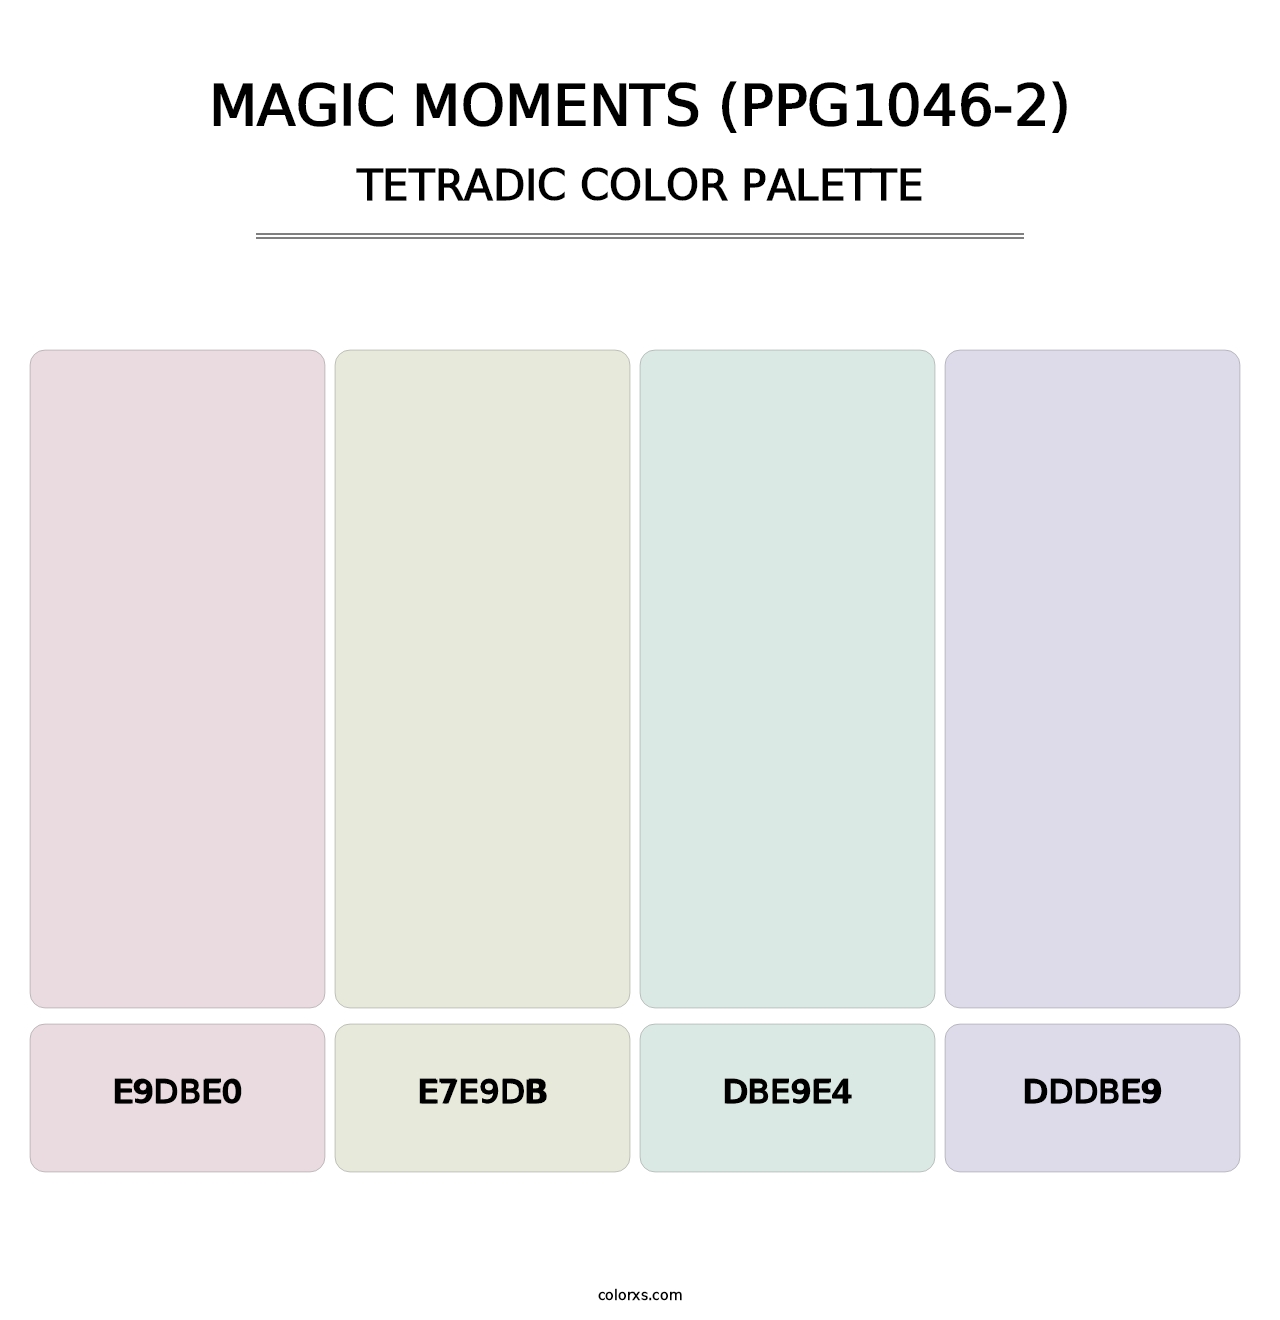 Magic Moments (PPG1046-2) - Tetradic Color Palette